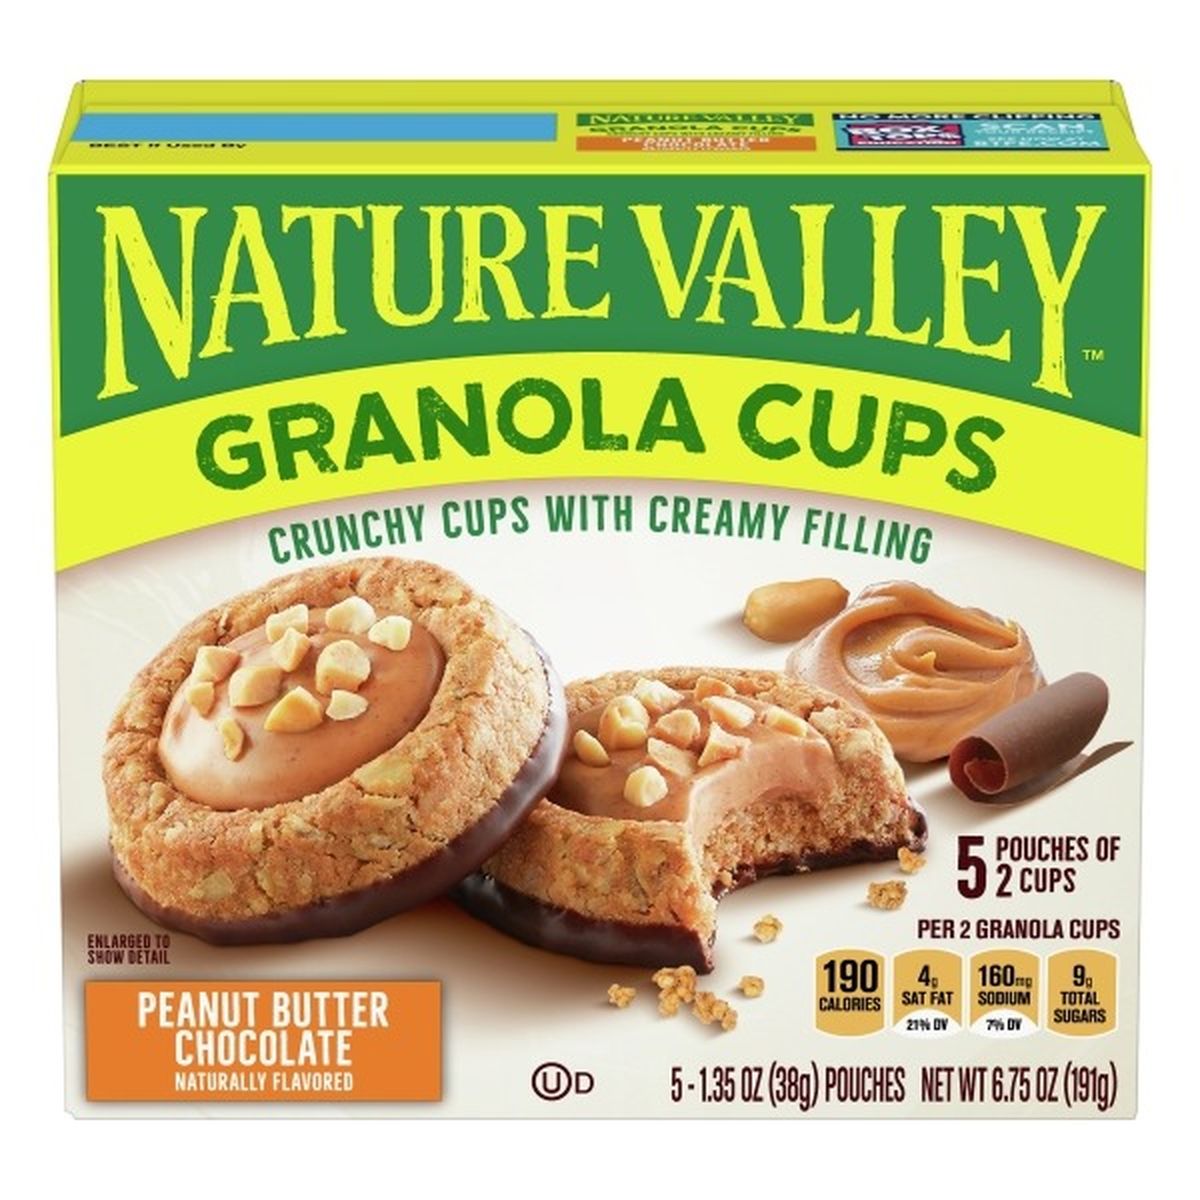 Calories in Nature Valley Granola Cups, Peanut Butter Chocolate